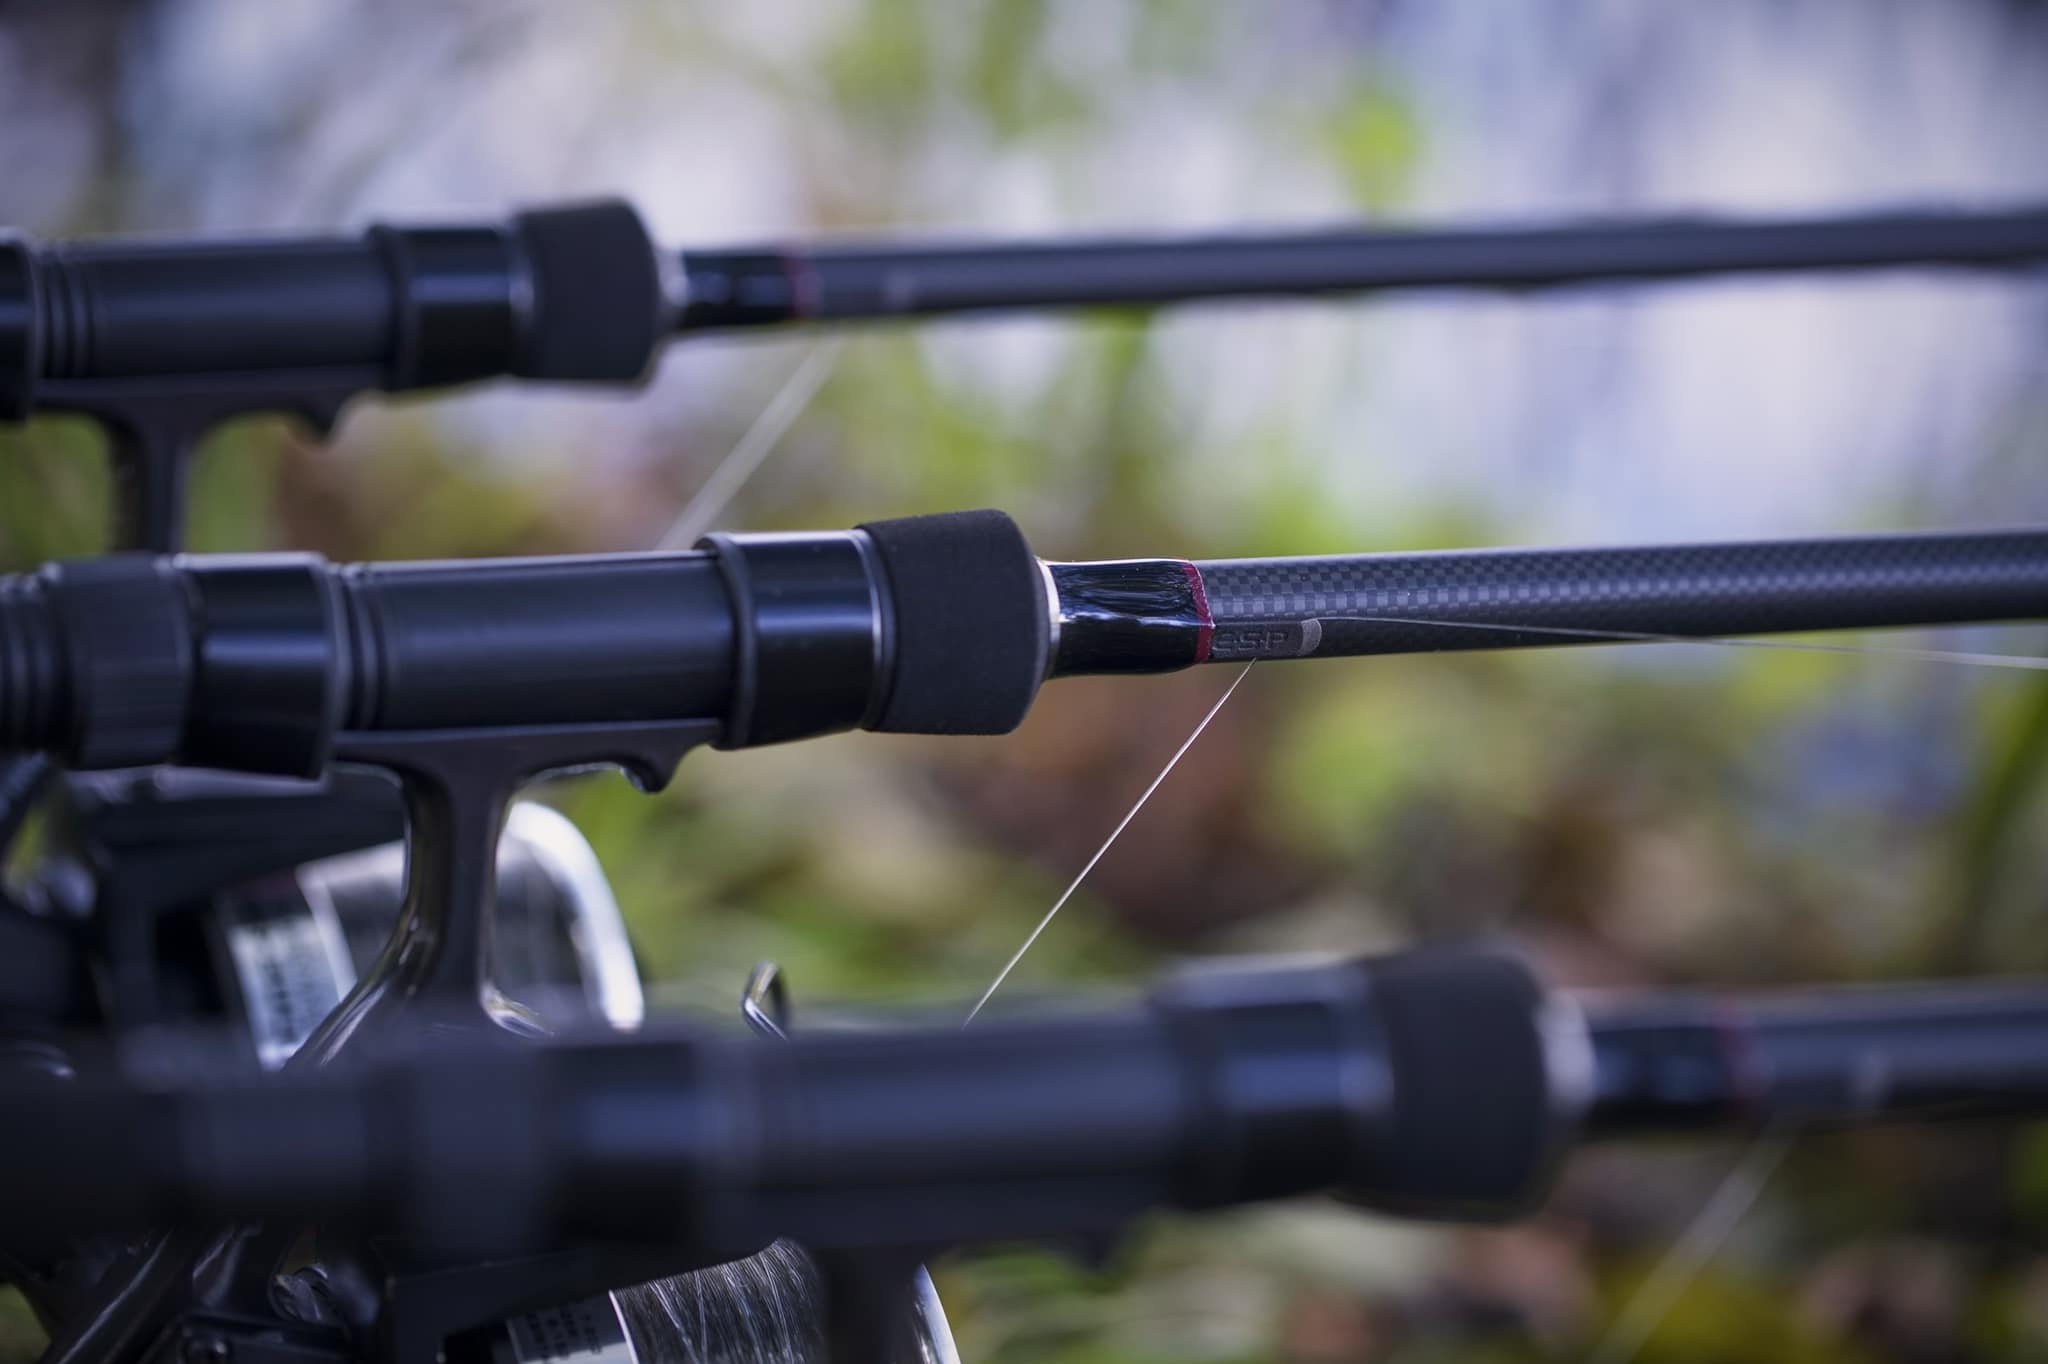 NEW RELEASE - 3 X ESP TERRY HEARN CLASSIC 12ft RODS